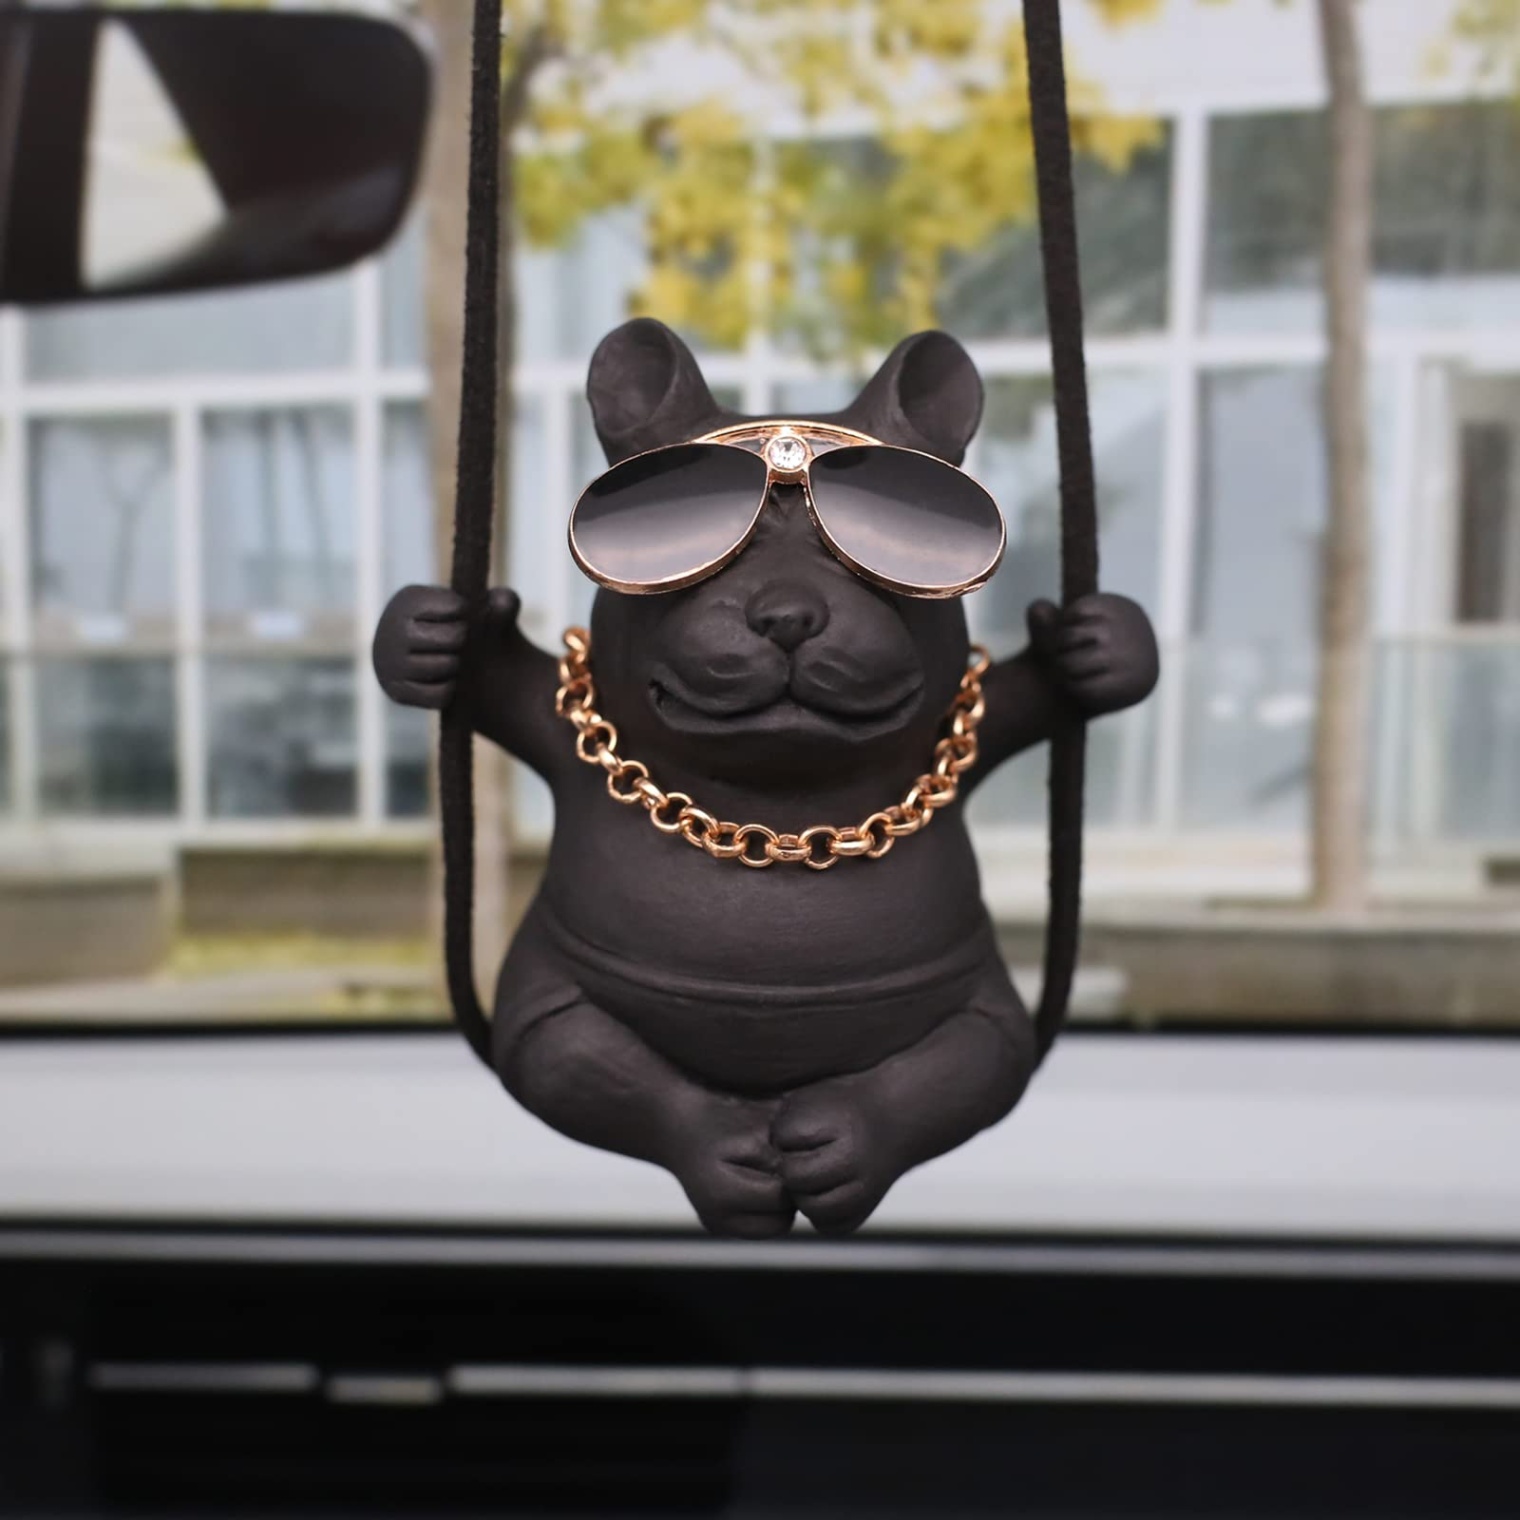 french bulldog accessories Niche Utama Home French Bulldog Car Decor Rear View Mirror Hanging Accessories, Swinging  Puppy with Sunglasses Cool Car Accessories, Dog Car Decorations Frenchie  Gifts